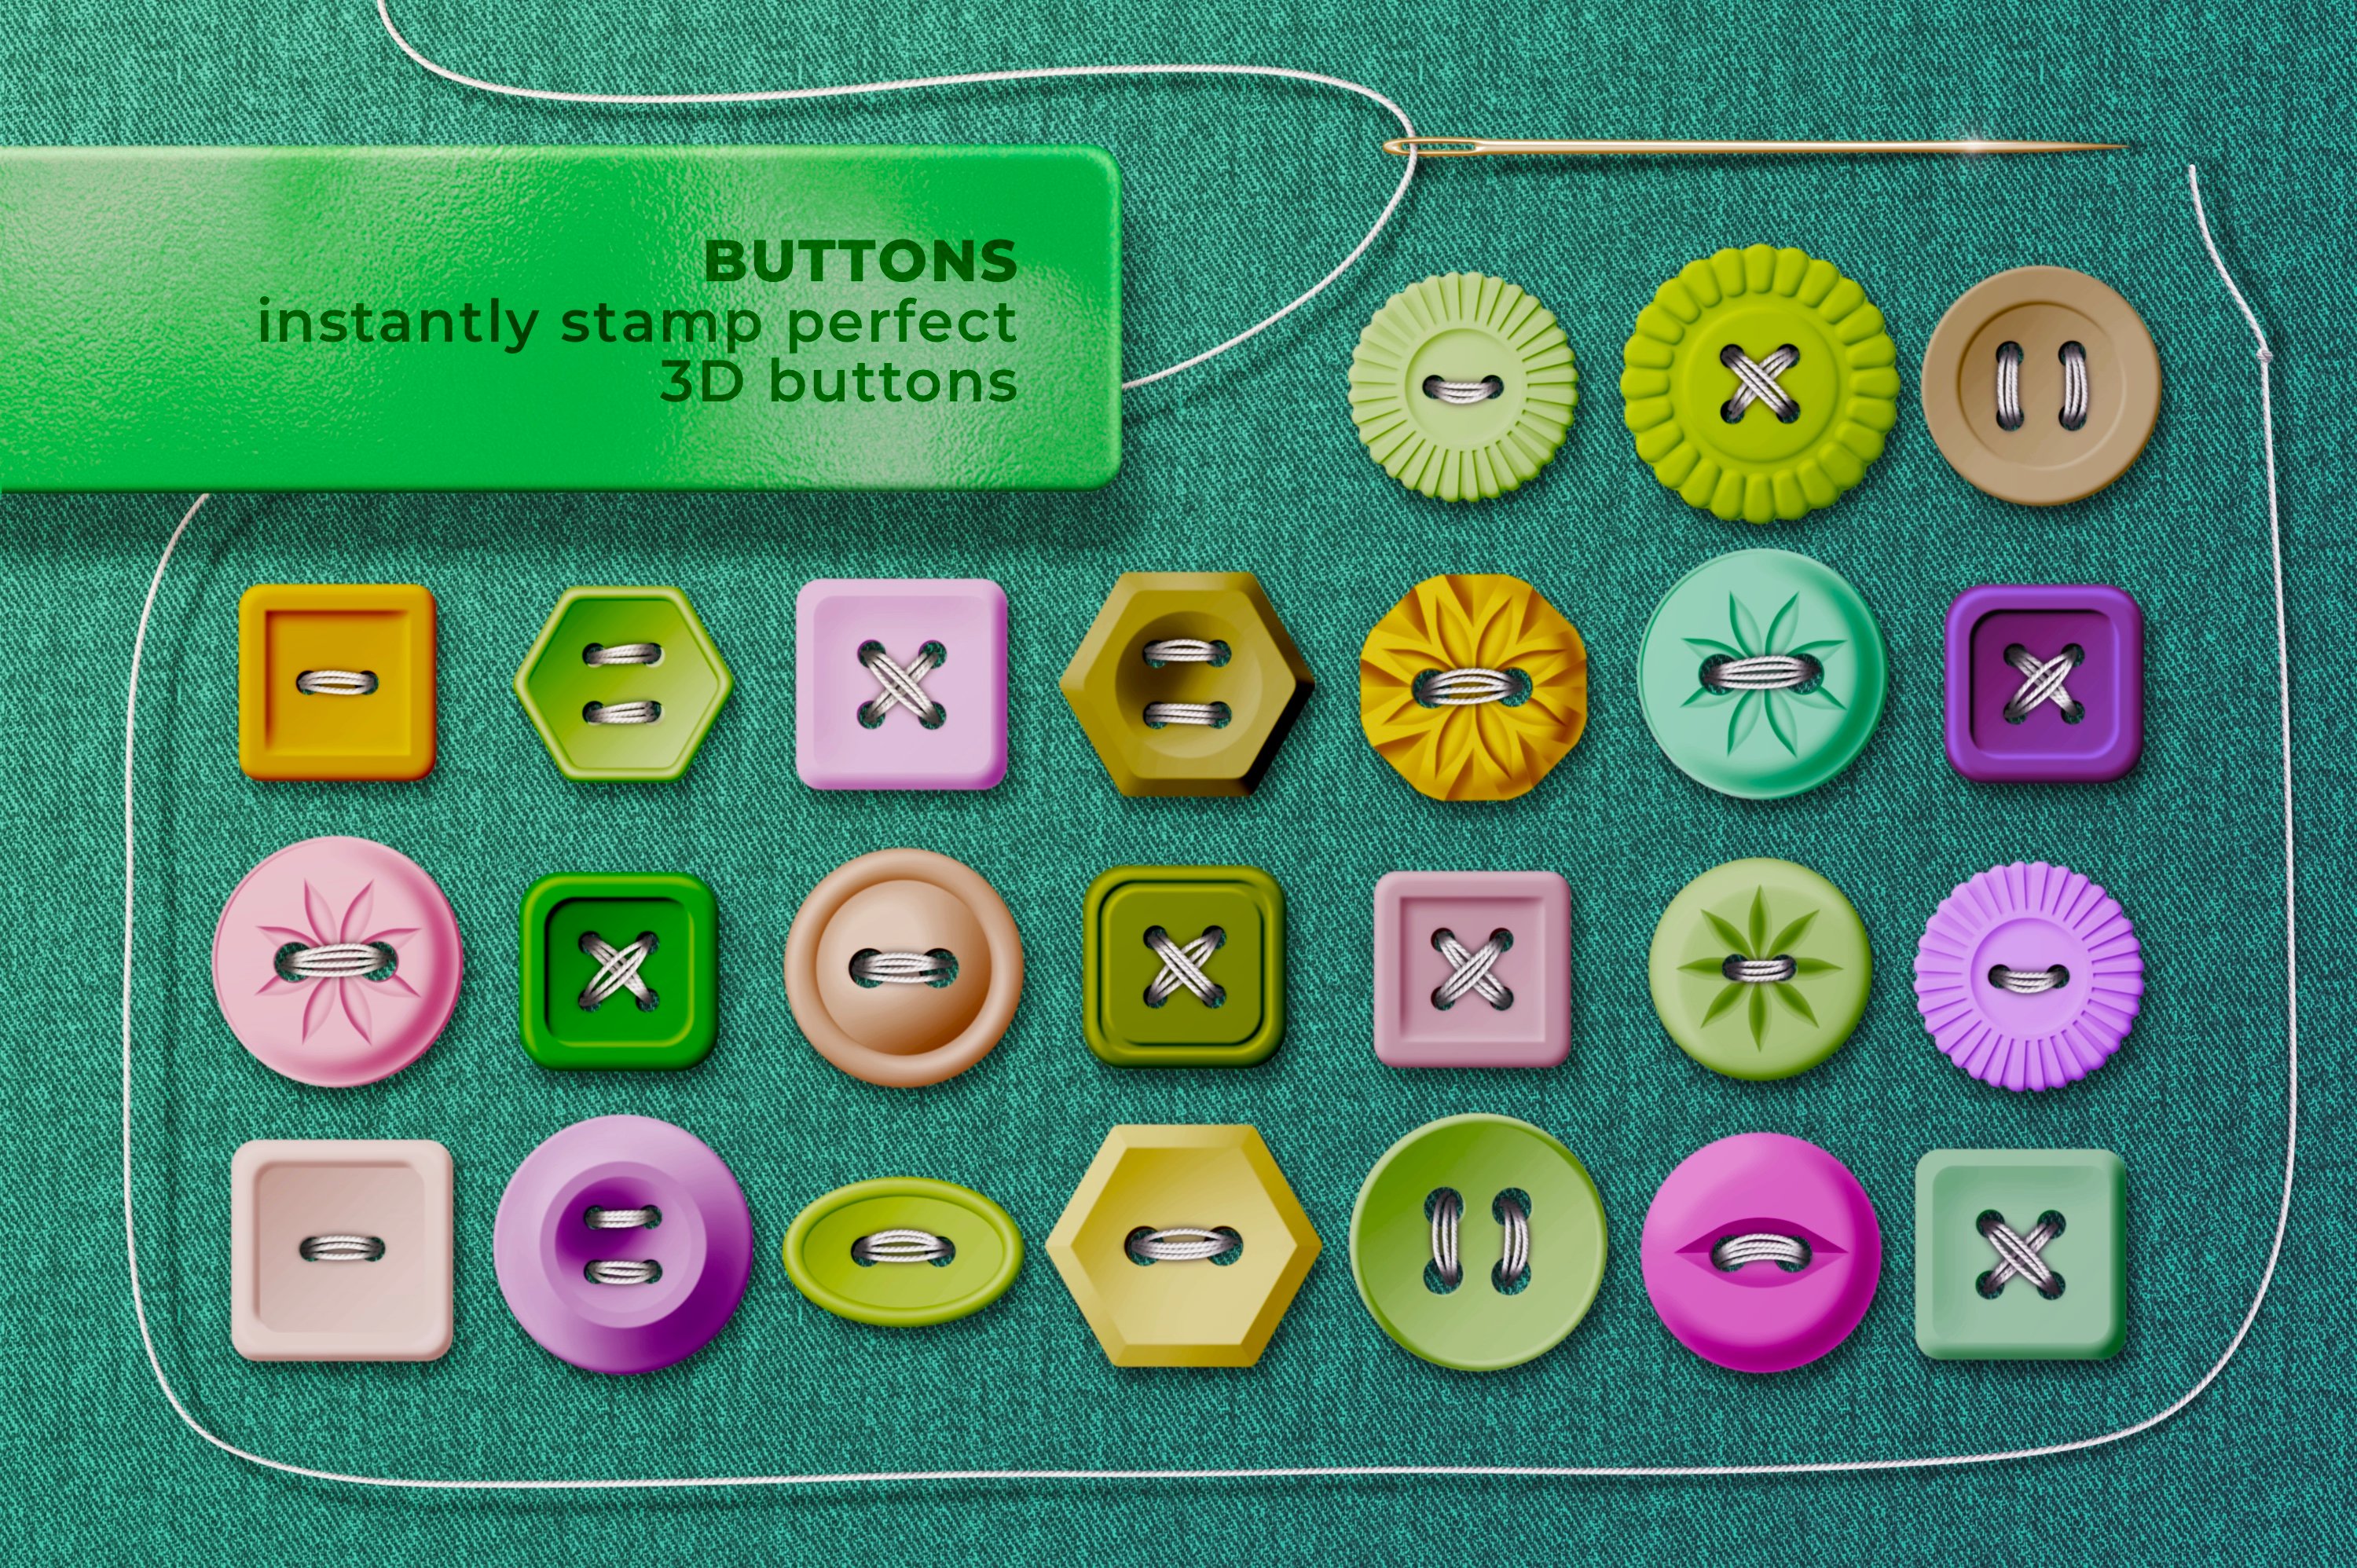 Buy Buttons For Stitch Craft Projects Online. Low Prices. Free S